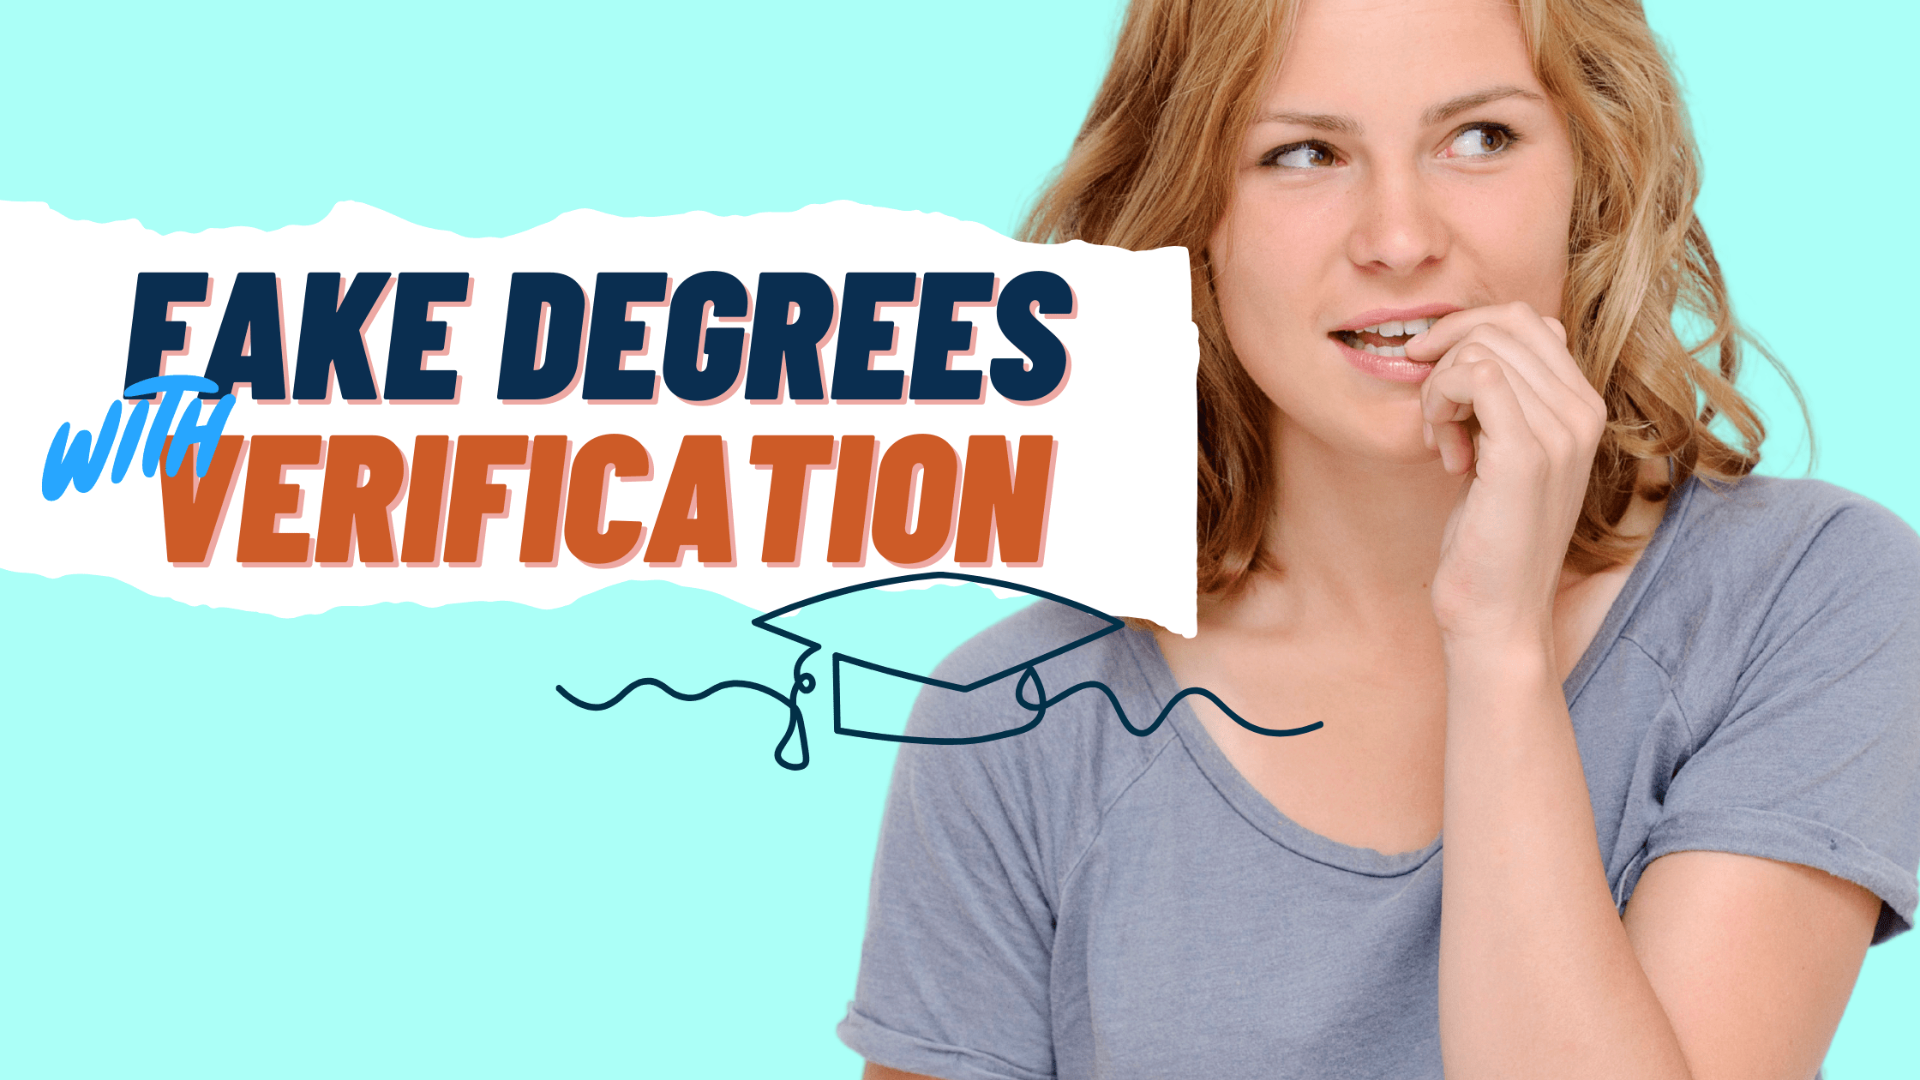 Fake degrees with verification